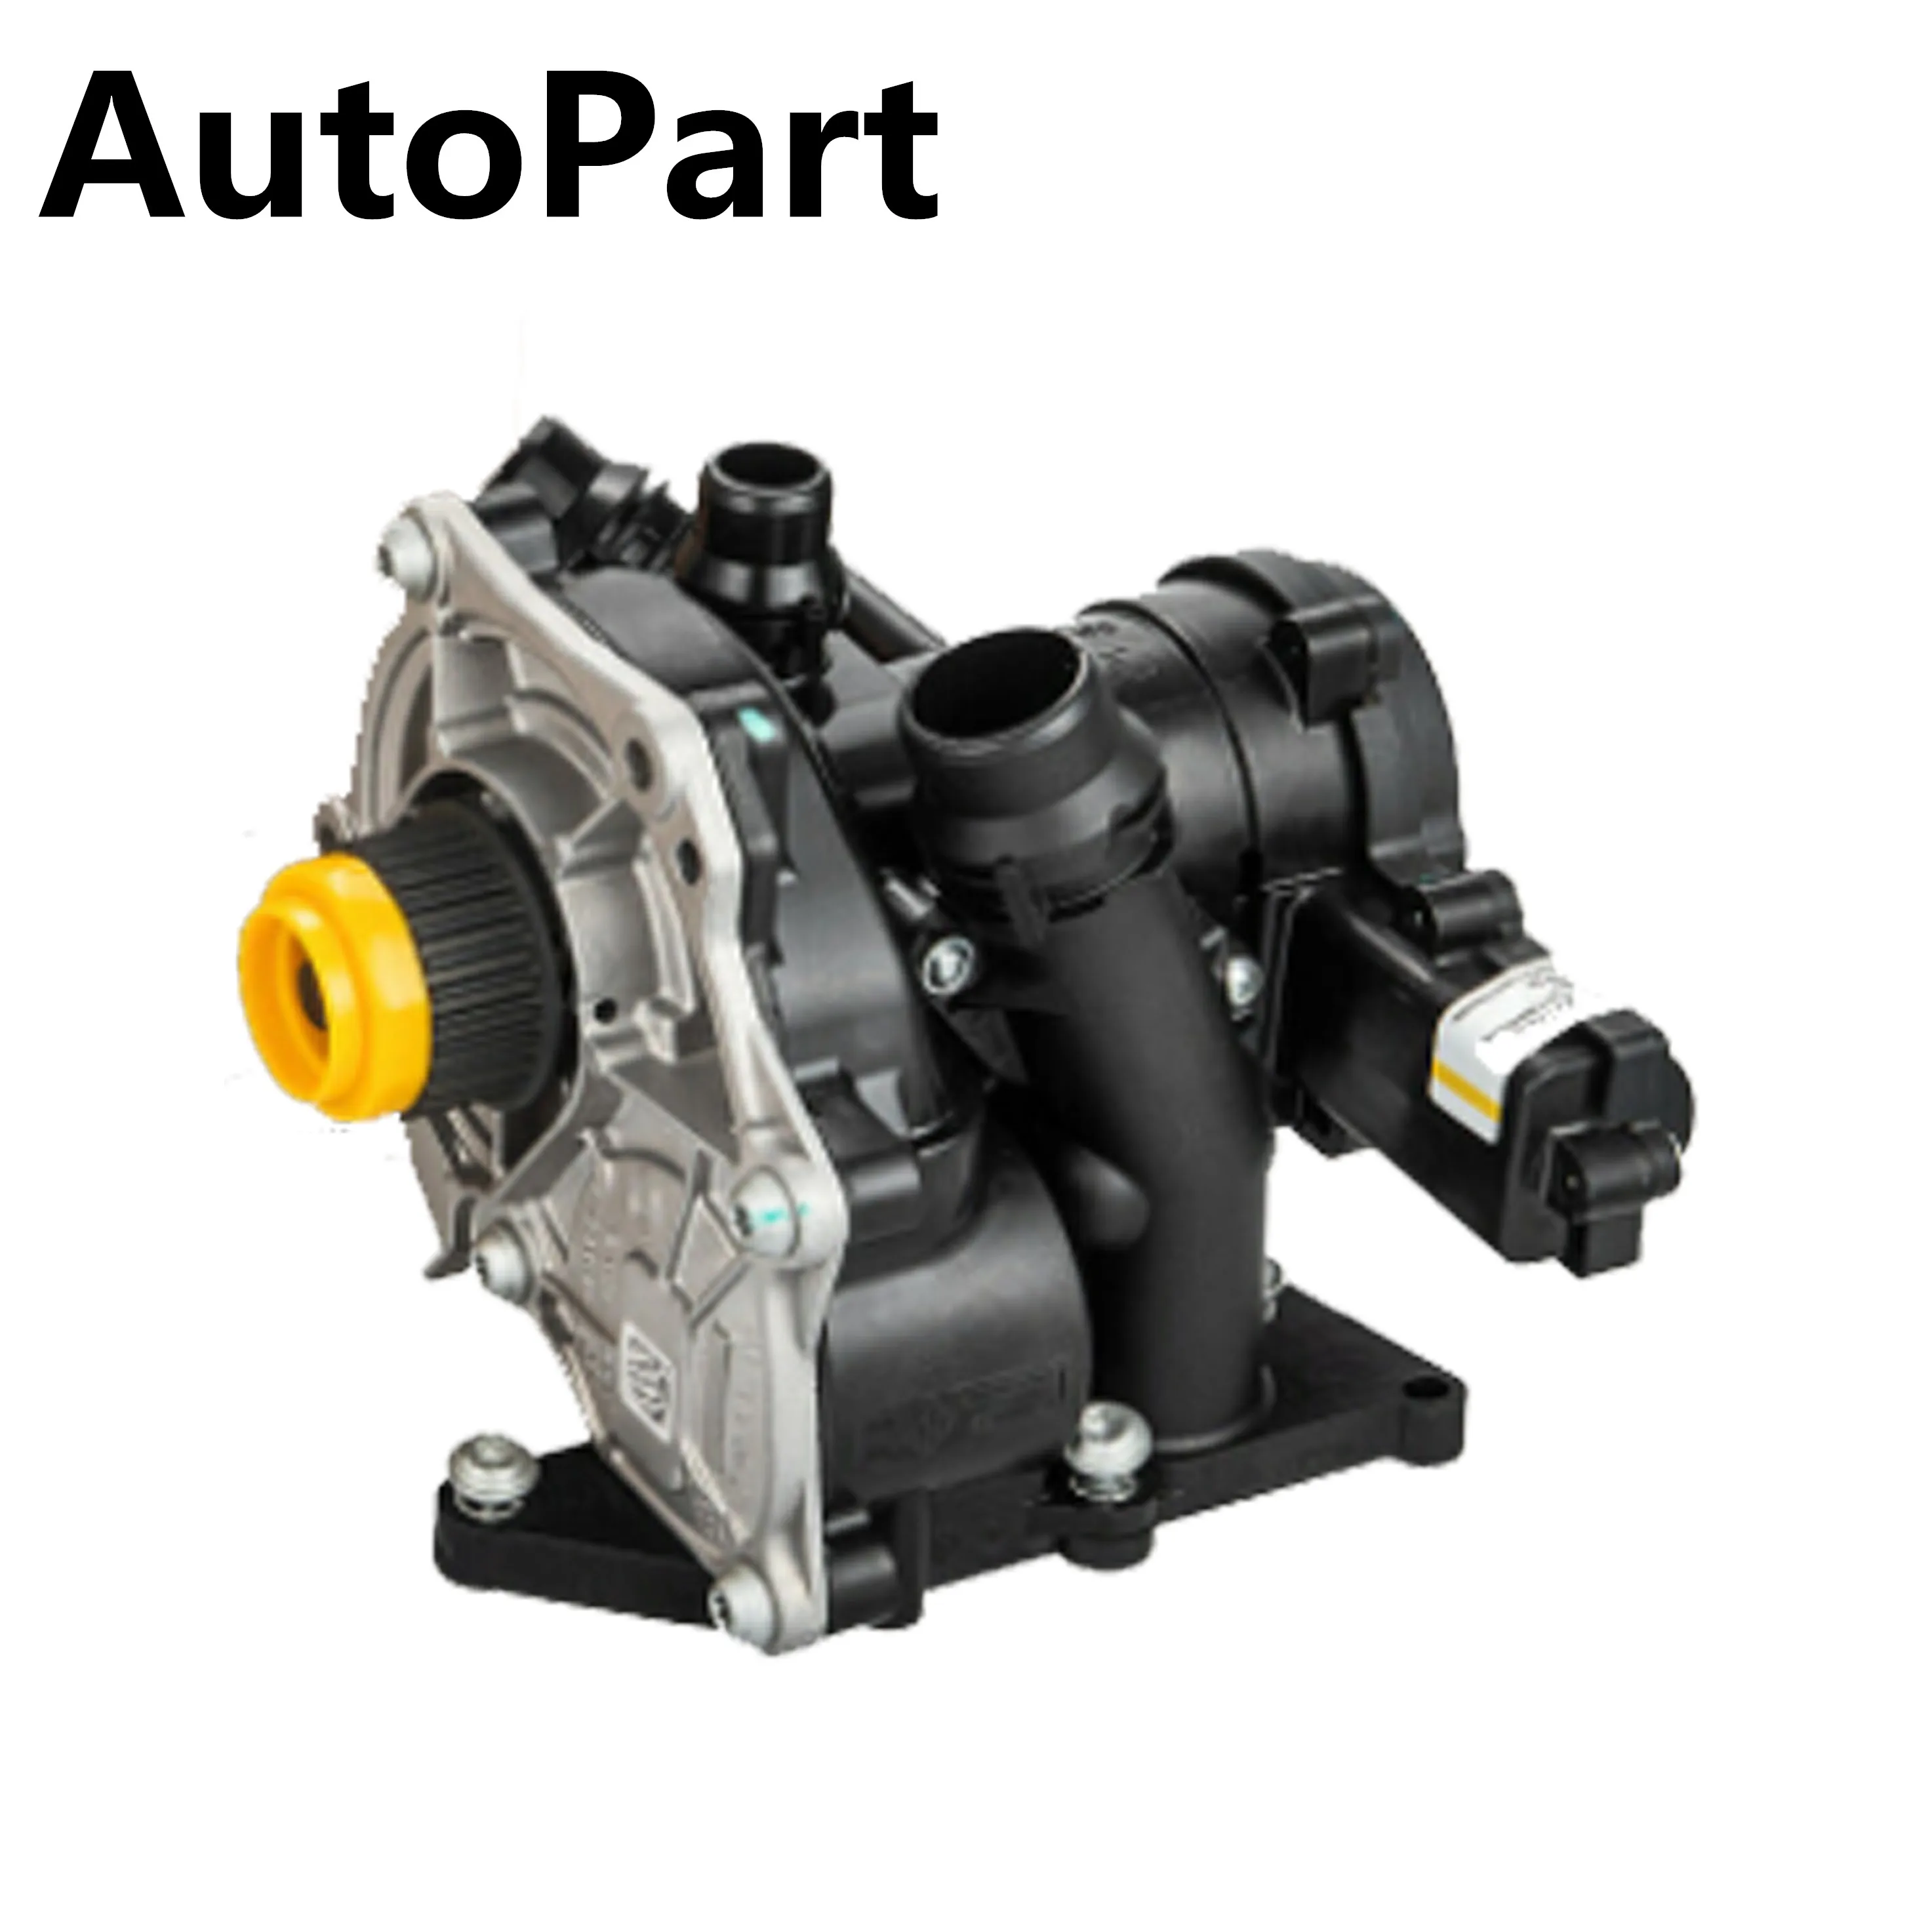 

06L 121 111 Electronic Water Pump Thermostat Assembly For VW Golf MK7 Passat B8 Audi A4 A6 A7 Q3 Q5 Q7 3RD EA888 1.8/2.0TFSI